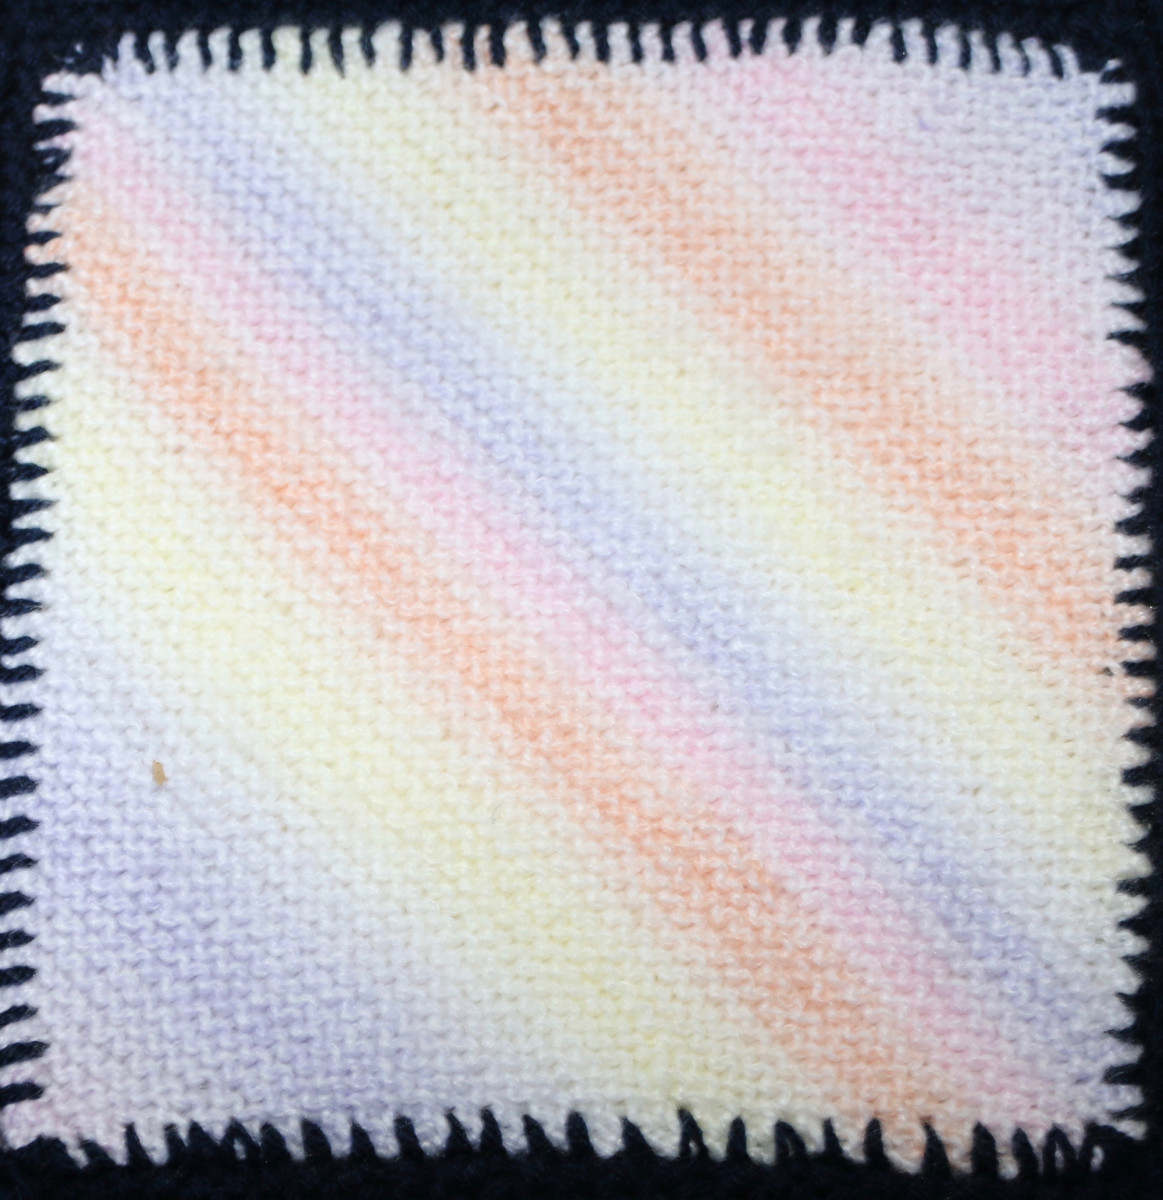 Knitted square - diagonal lines in pink, orange, yellow, blue, purple